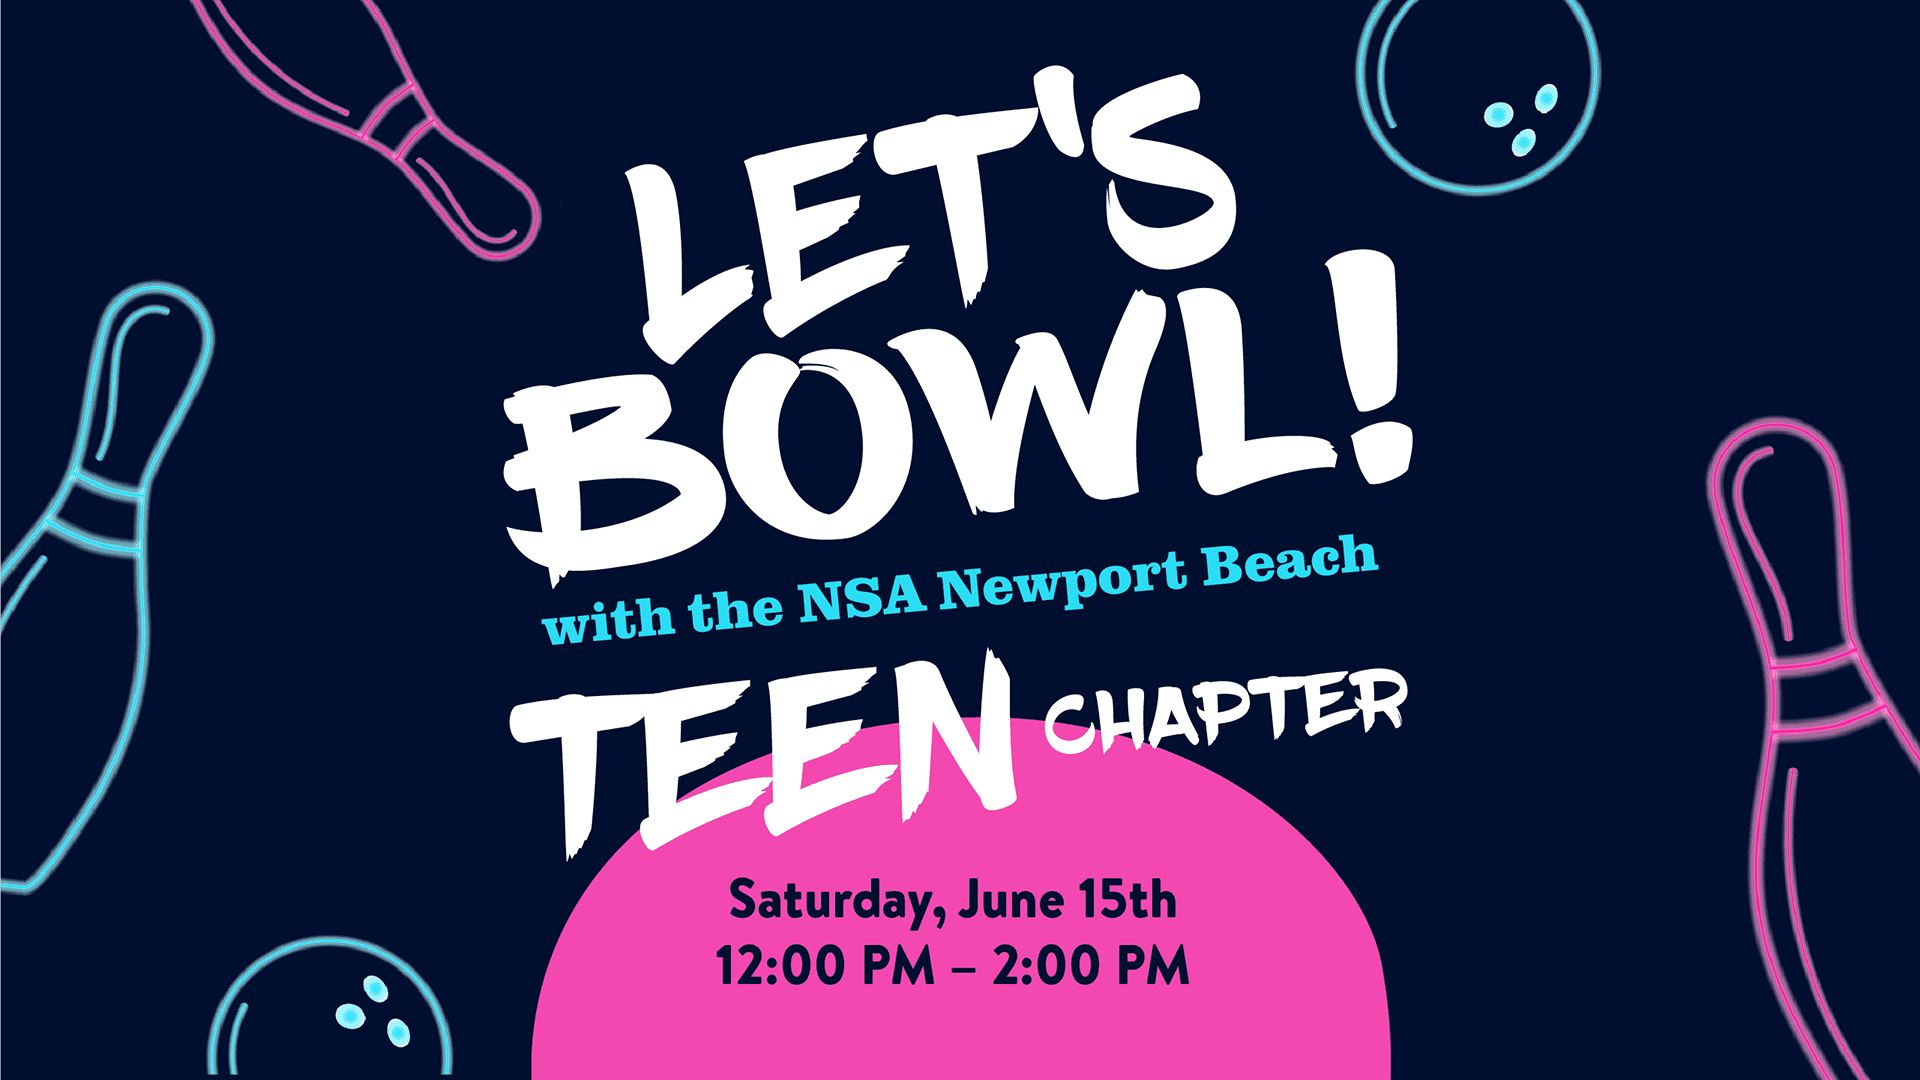 A bold graphic invitation that reads "Let's Bowl!" for an event with the NSA Newport Beach Teen Chapter, scheduled from 12:00 PM - 2:00 PM on June 15th. Background features stylized bowling pins and balls on a dark blue backdrop.